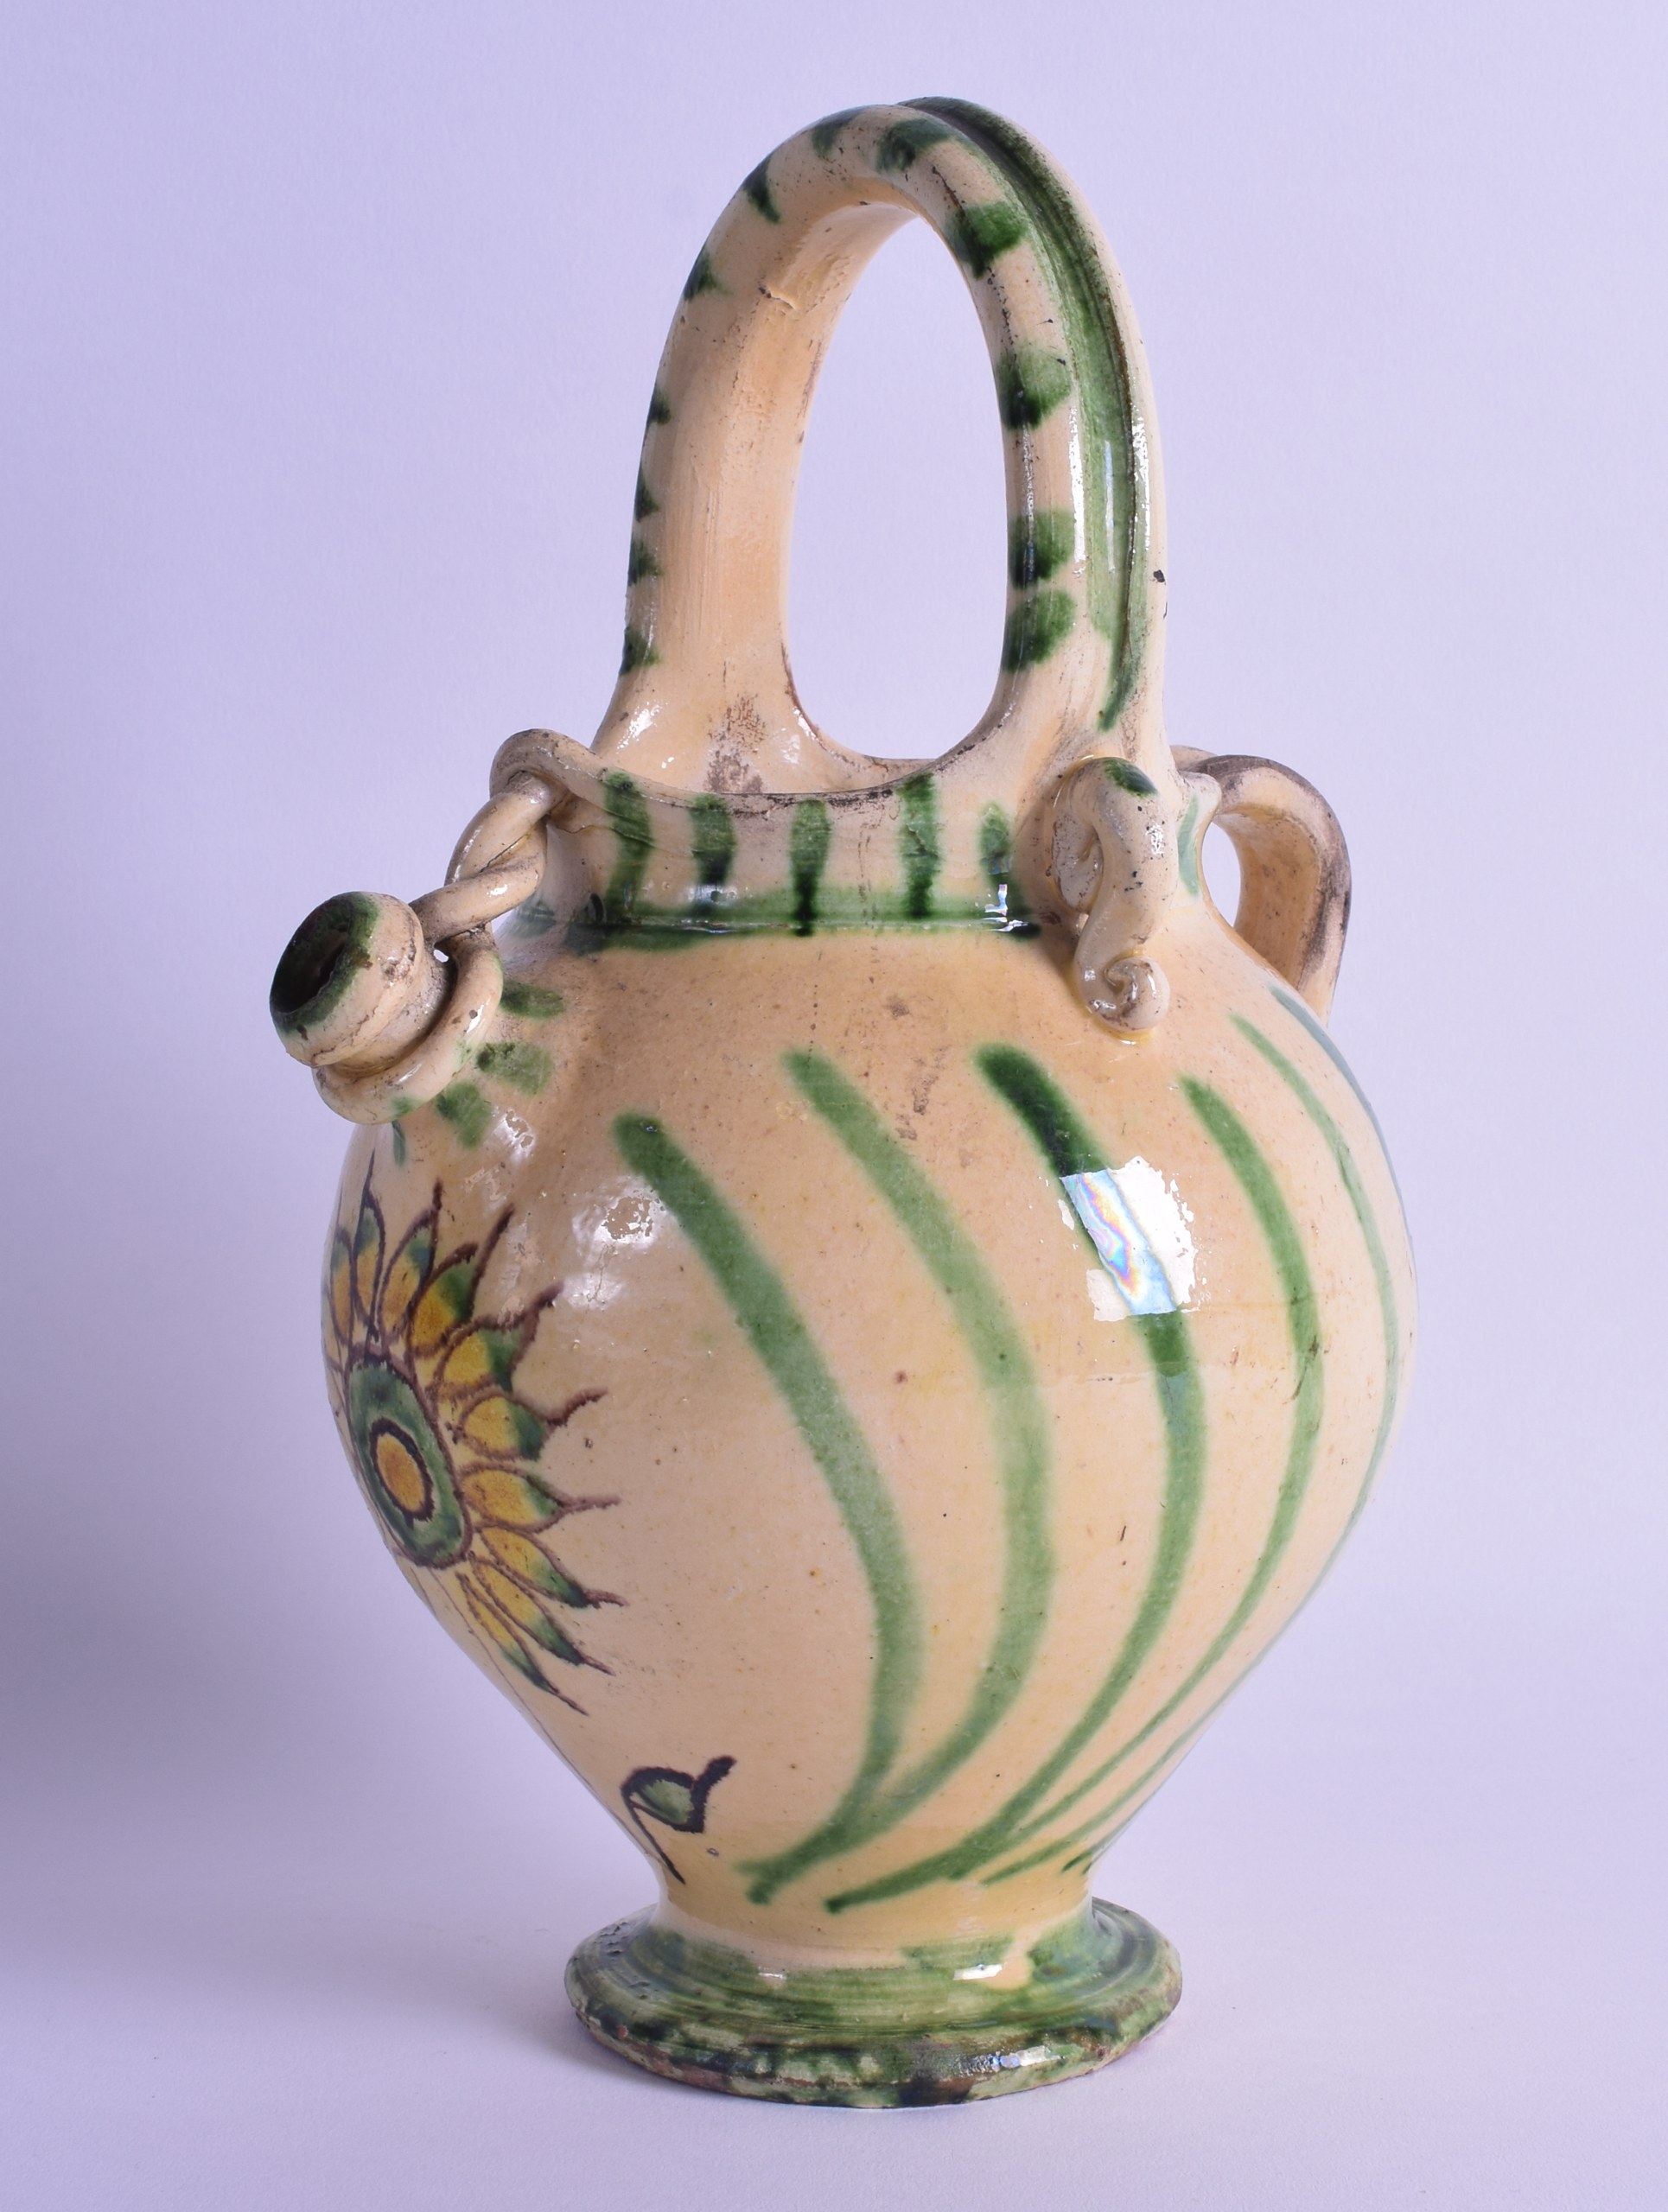 AN EARLY 20TH CENTURY CONTINENTAL MAJOLICA STYLE BASKET JUG painted with floral sprays. 25.5 cm